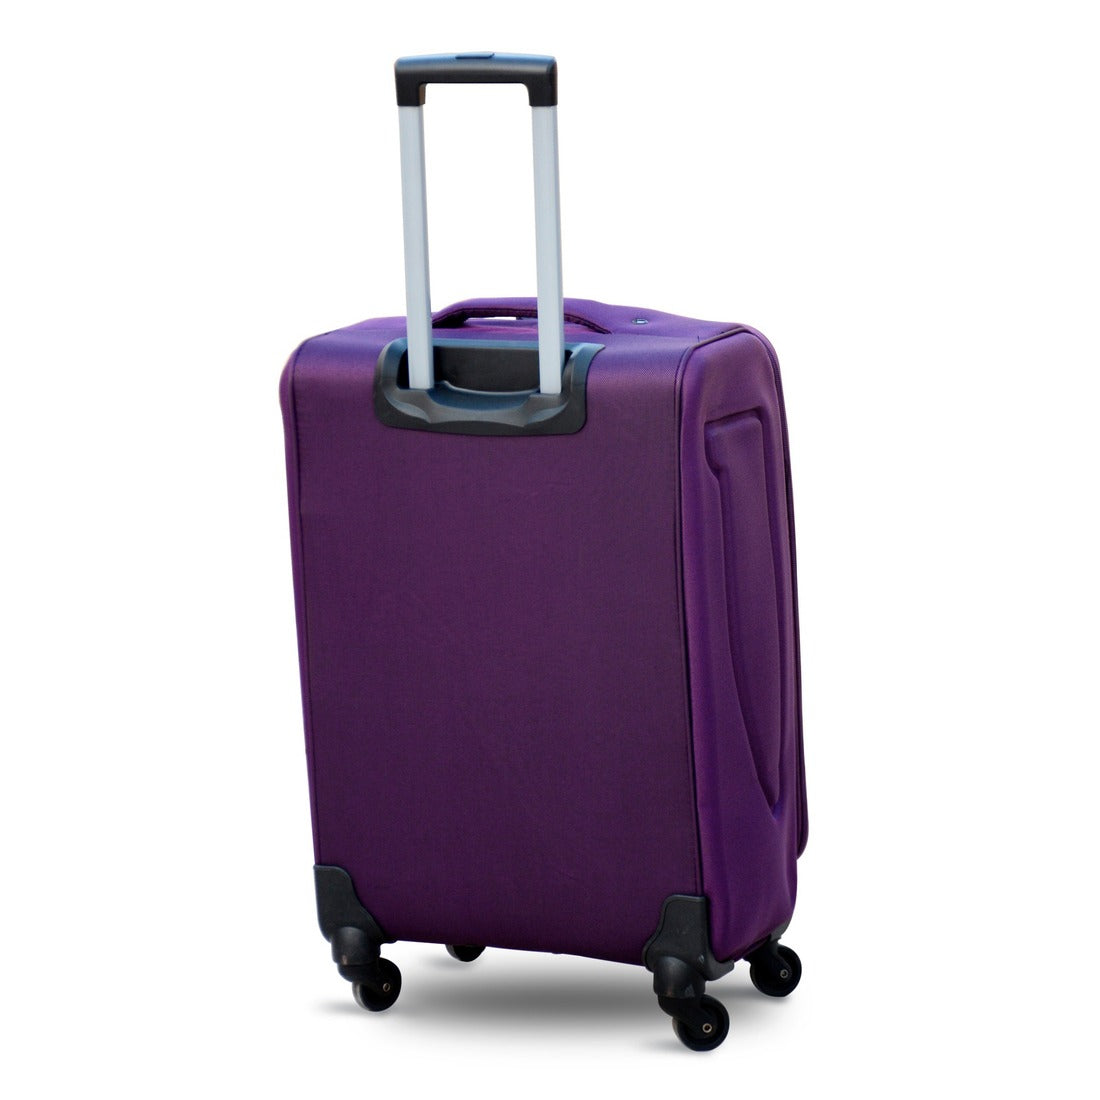 Soft Material Four Wheel Luggage Lightweight Soft Shell - 20 Inches 10 Kg Capacity